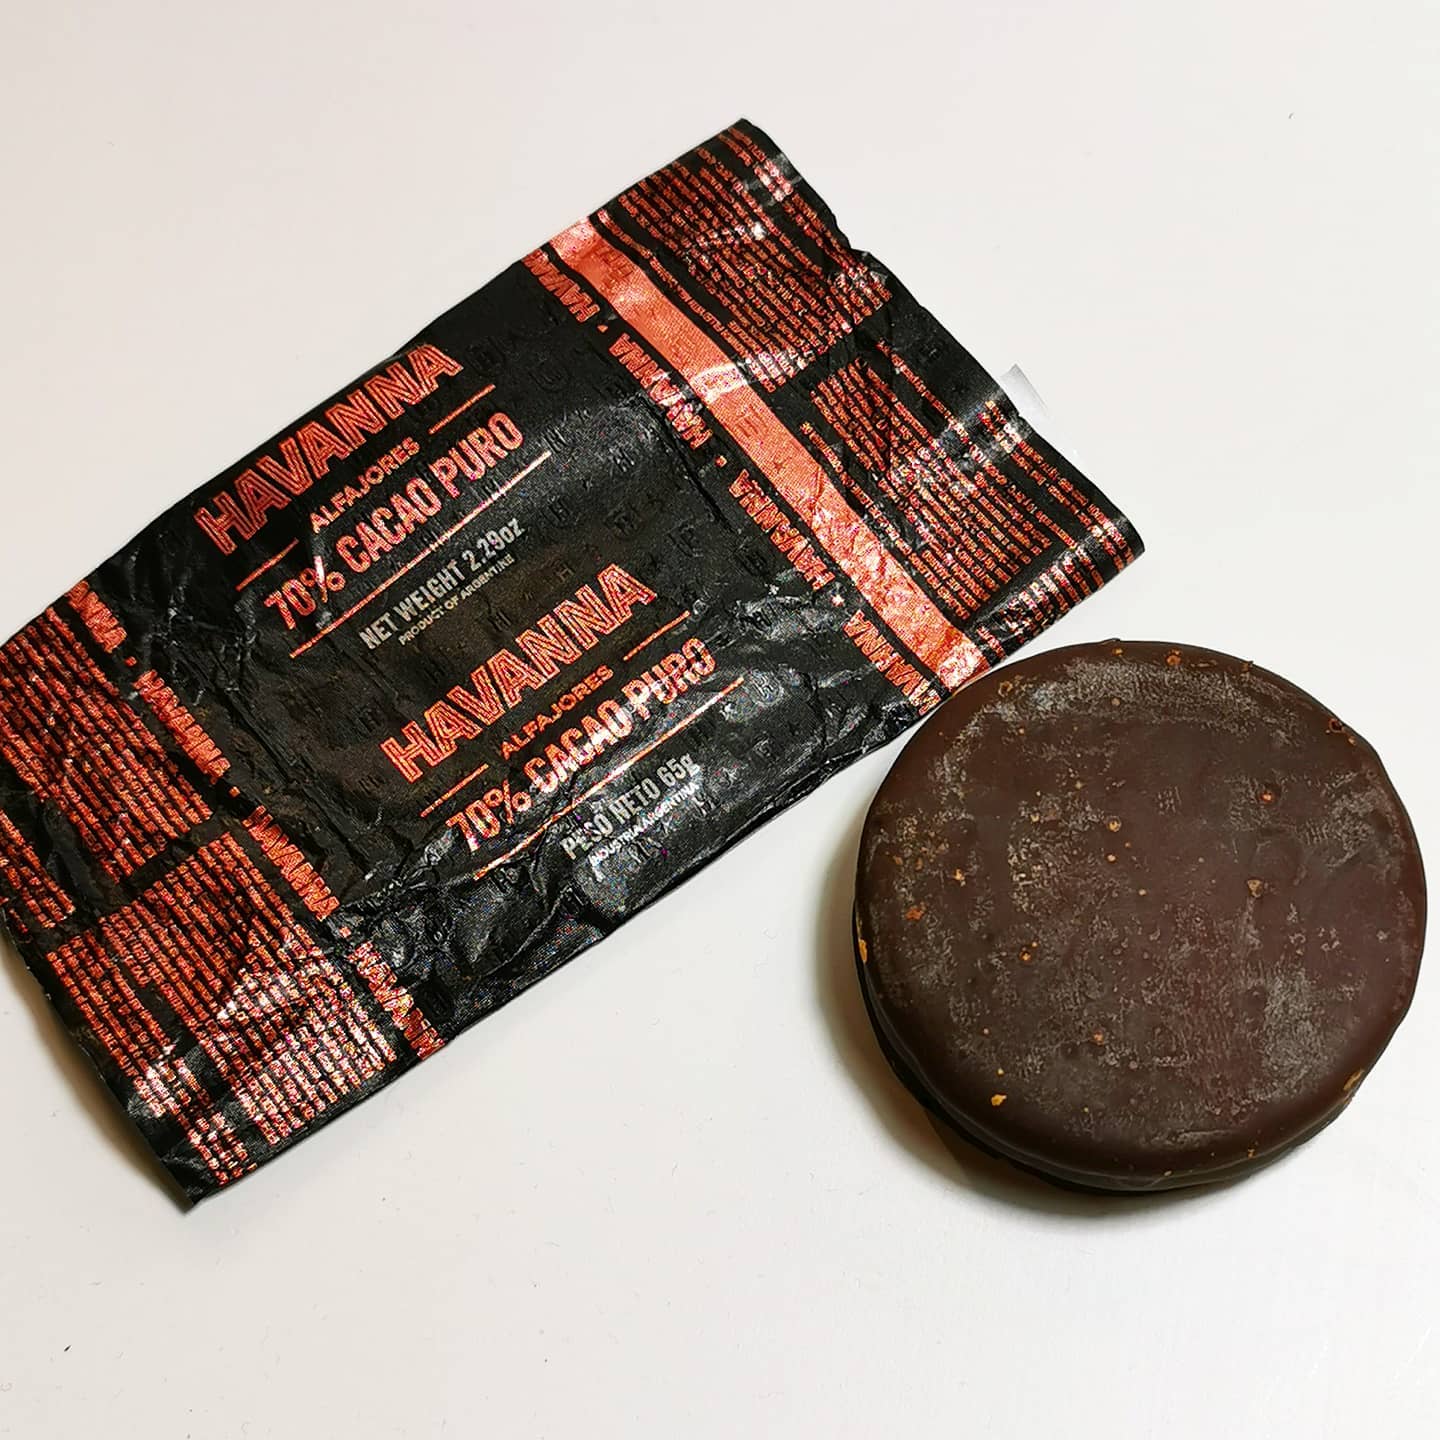 The Havanna Alfajor.This little piece was anonymously delivered to me all the way from Argentina before the lockdown and I have no idea what it is.Up until now I had never heard of Havanna, but turns out it is actually a pretty big deal in the food production world. Based in Argentina, one of it’s more famous products is Alfajores. I had never heard of Alfajores either, and it turns out this is a big deal too. Oh what a life I have led, sheltered from the foodstuffs of the Latin Americas and parts of Europe.This luxurious chunk of what I hope is chocolate is strictly controlled and in Spain, at least, the Ministry of Agriculture and Fisheries has given the following strict guidelines as to what can be called an Alfajor:.“... según el reglamento, se emplearán exclusivamente miel pura de abeja, avellanas, almendras, pan rallado, harina, azúcar y especias (matalauva, cilantro, ajonjolí, clavo y canela). Los alfajores tendrán forma cilíndrica, con un peso mínimo de 30 gramos por unidad, con un tamaño mínimo de siete centímetros de longitud y un diámetro mínimo de 1,5  centímetros.”.¿en inglés?Oh sorry!.... according to the regulation, pure bee honey, hazelnuts, almonds, breadcrumbs, flour, sugar and spices (matalauva, coriander, sesame, cloves and cinnamon) will be used exclusively. The alfajores will have a cylindrical shape, with a minimum weight of 30 grams per unit, with a minimum size of seven centimeters in length and a minimum diameter of 1.5 centimeters.Additionally it has to be packaged individually in wax paper or similar before being boxed in ONLY cardboard or wooden boxes. Never plastic.Damn they ain’t messing about with this shit..Biting into this thing was pure pleasure. The 70% cacao chocolate did it’s job offsetting the sweetness with bitterness, really damn delicious and the caramel was a nice little punctuation, but the main feature of this shit for me was the texture. It was soft, smooth and crumbly, a little chewy, kind of like cookie dough or a well made brownie. I am actually a bit lost for words at how good this was. If you get the chance to try one, do so.The Alfajor and Omegajor - 9/10#alfajores #cookie #biscuit